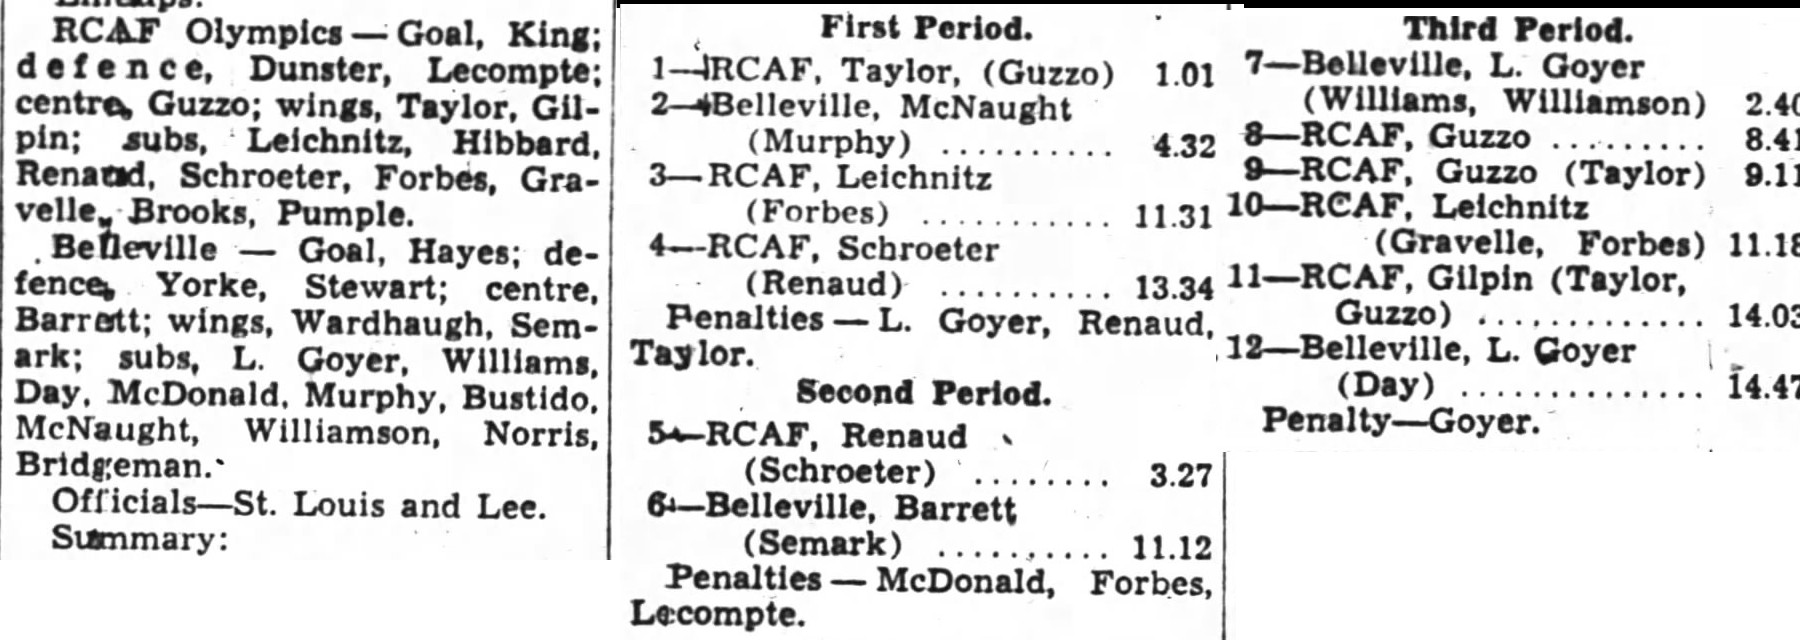 Image: Box Score of  RCAF Flyers Win in Belleville